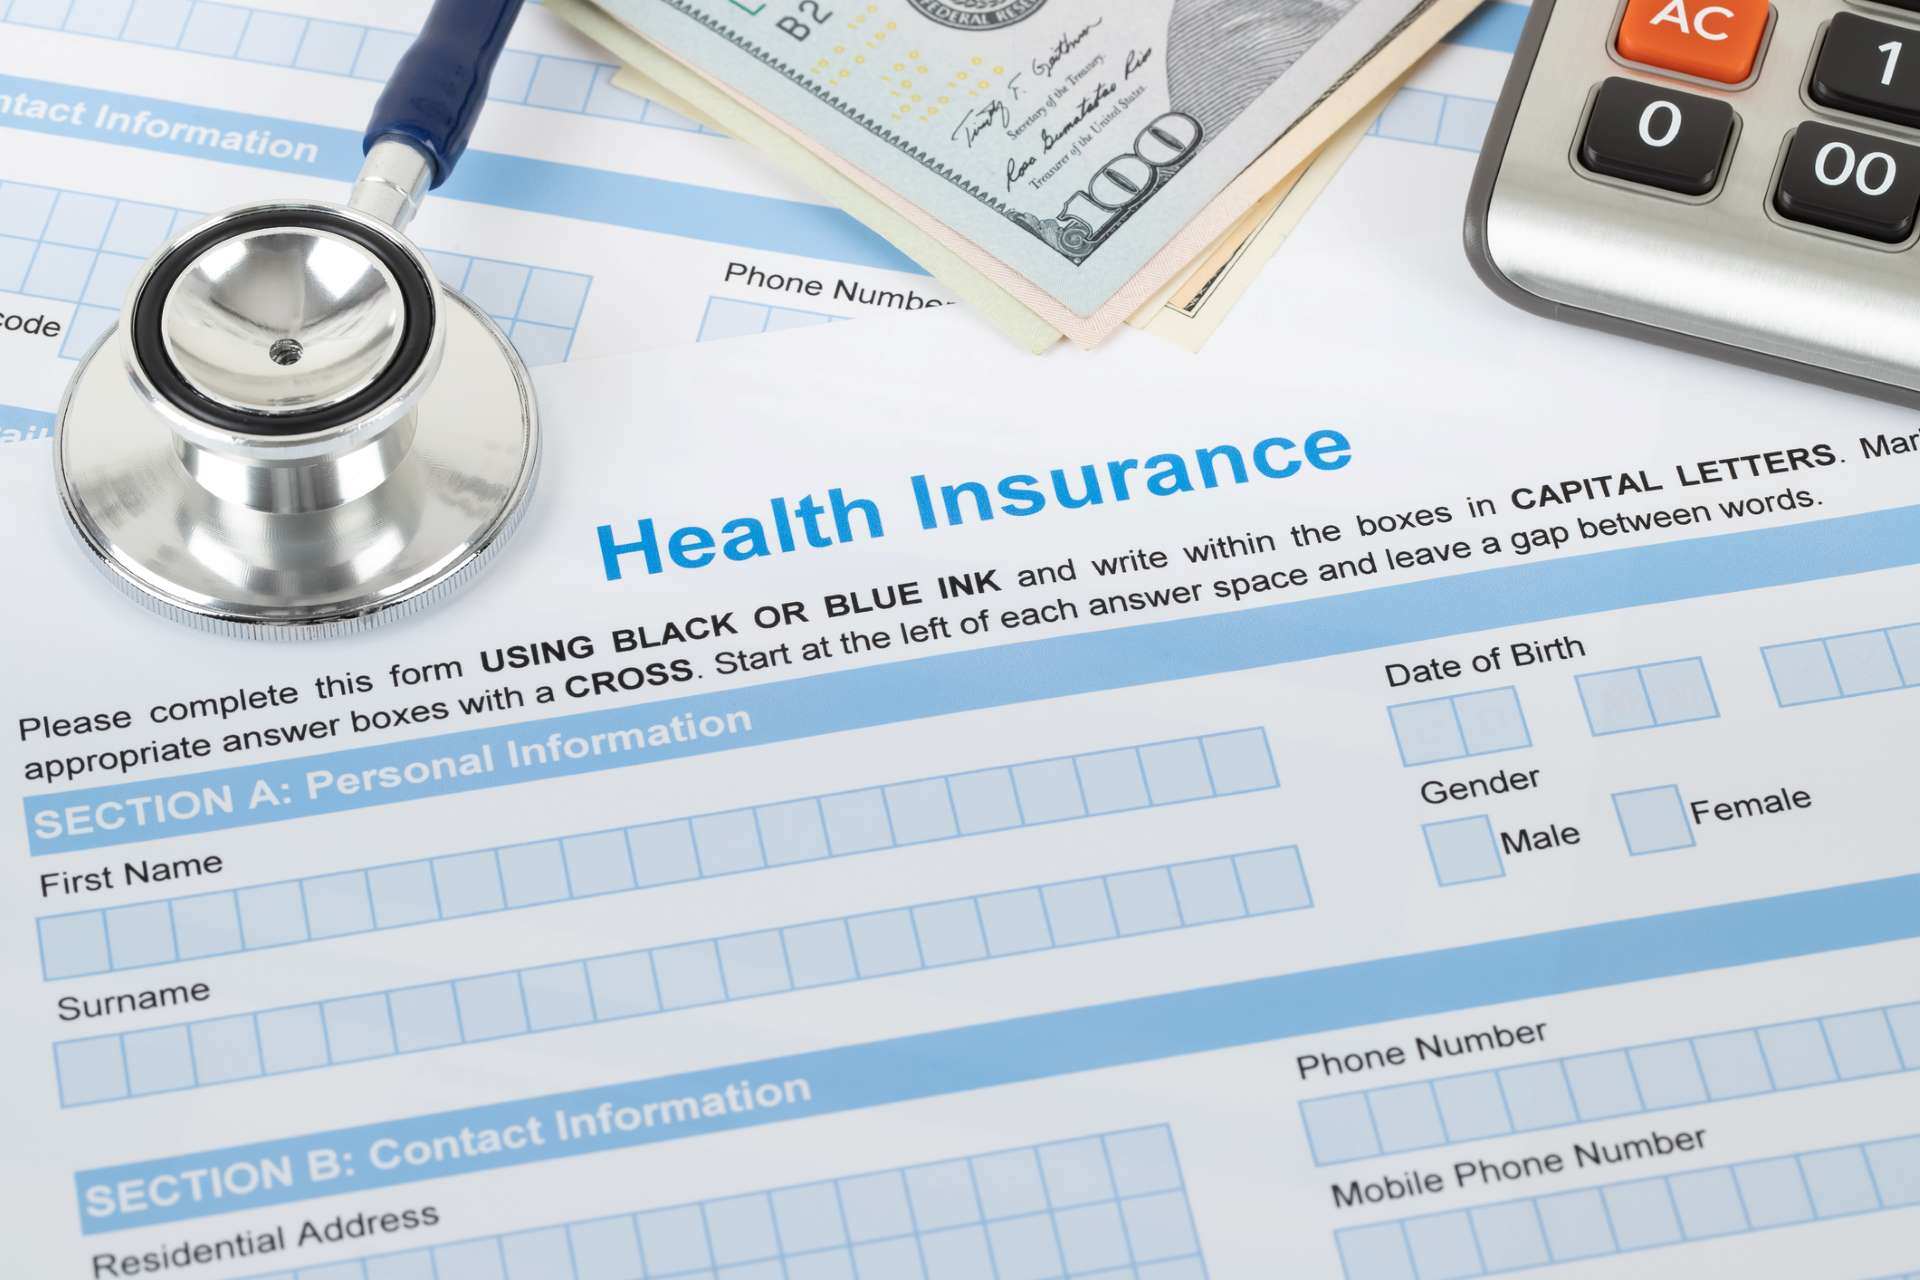 What's The Difference Between Self-Pay and Health Insurance?